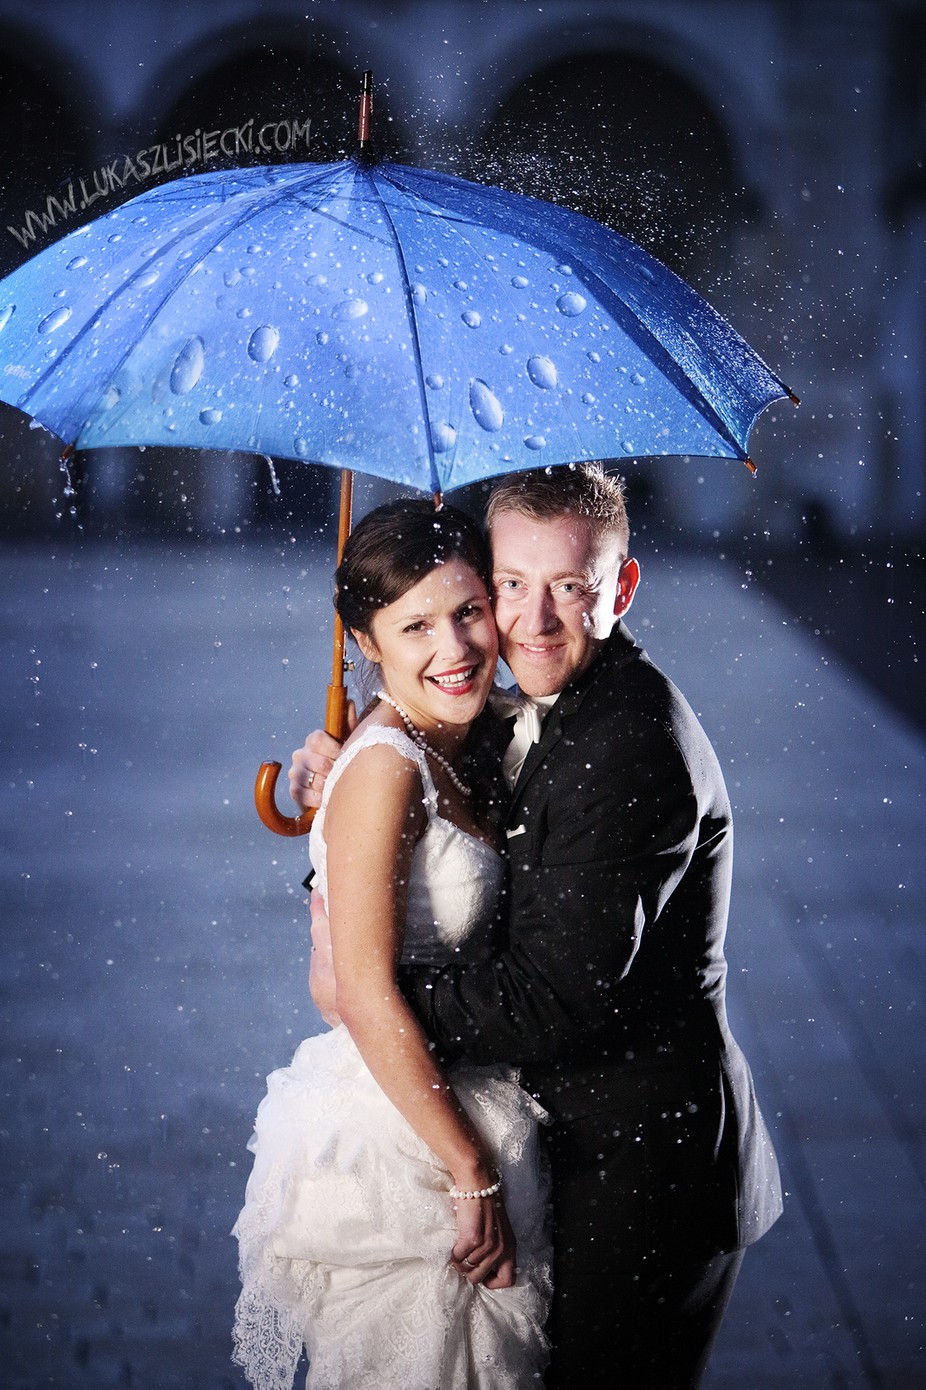 "Laughing in the rain" by LukaszLisiecki - Weddings At Night Photo Contest